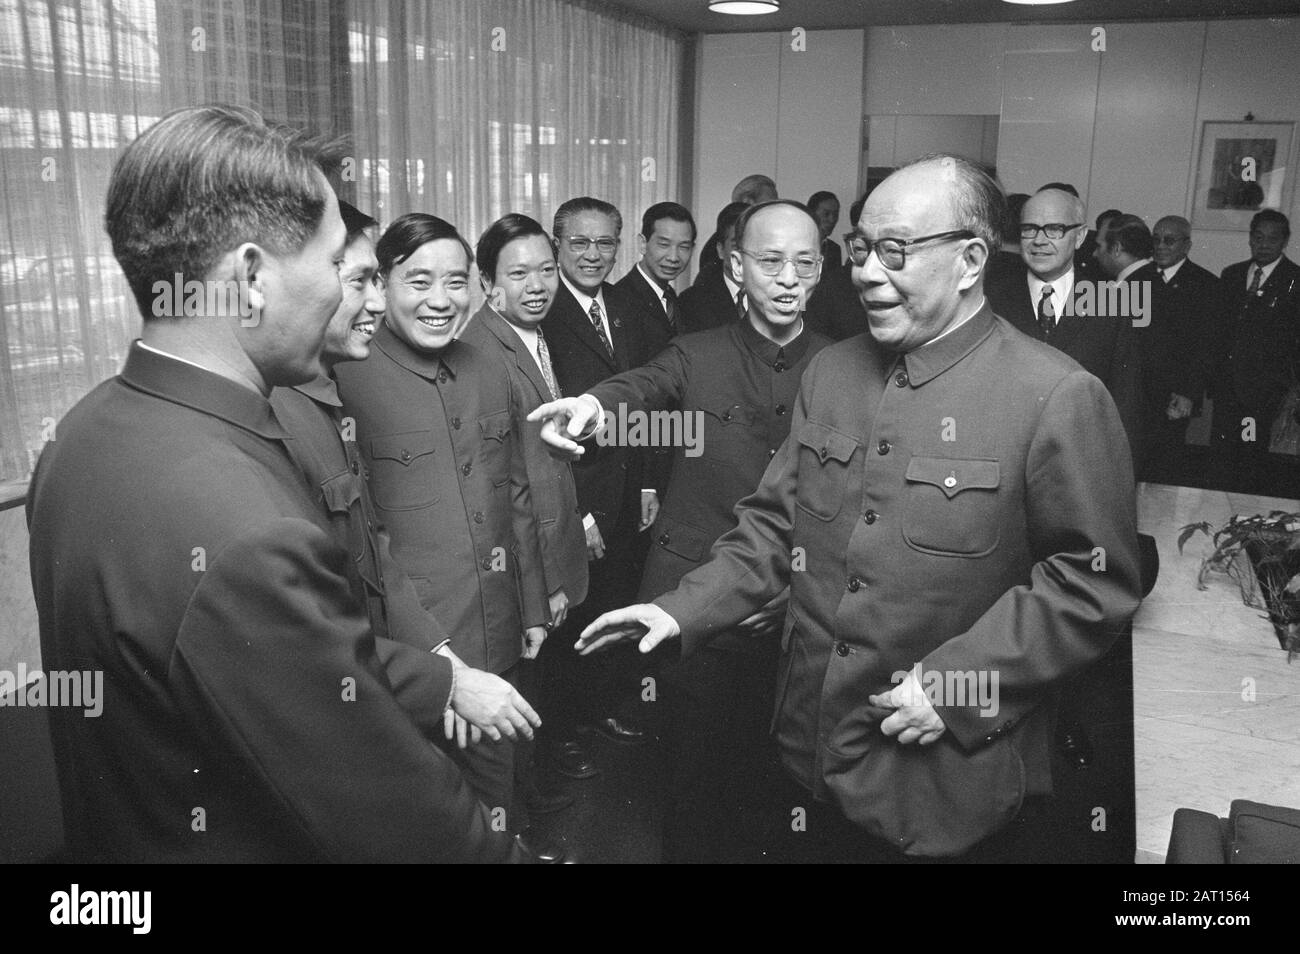 First Ambassador of Chinese People's Republic to the Netherlands arrives at Schiphol, Ambassador Hao Te Ching and other Chinese make acquaintance Date: November 2, 1972 Location: Noord-Holland, Schiphol Keywords: ambassadors Stock Photo